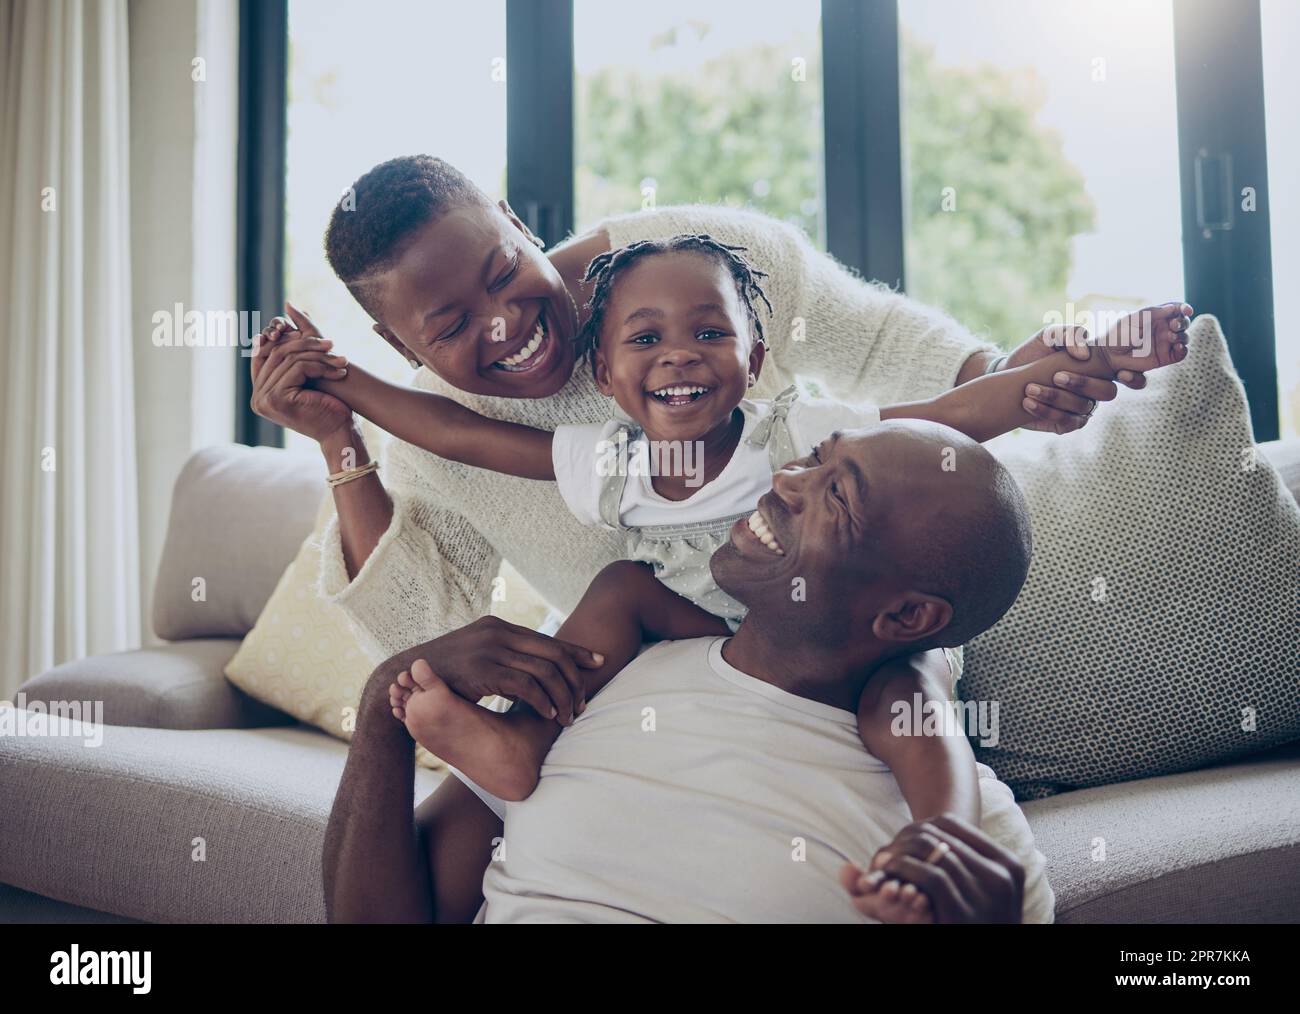 Happy daughter, happy parents. a young family spending time together at home. Stock Photo